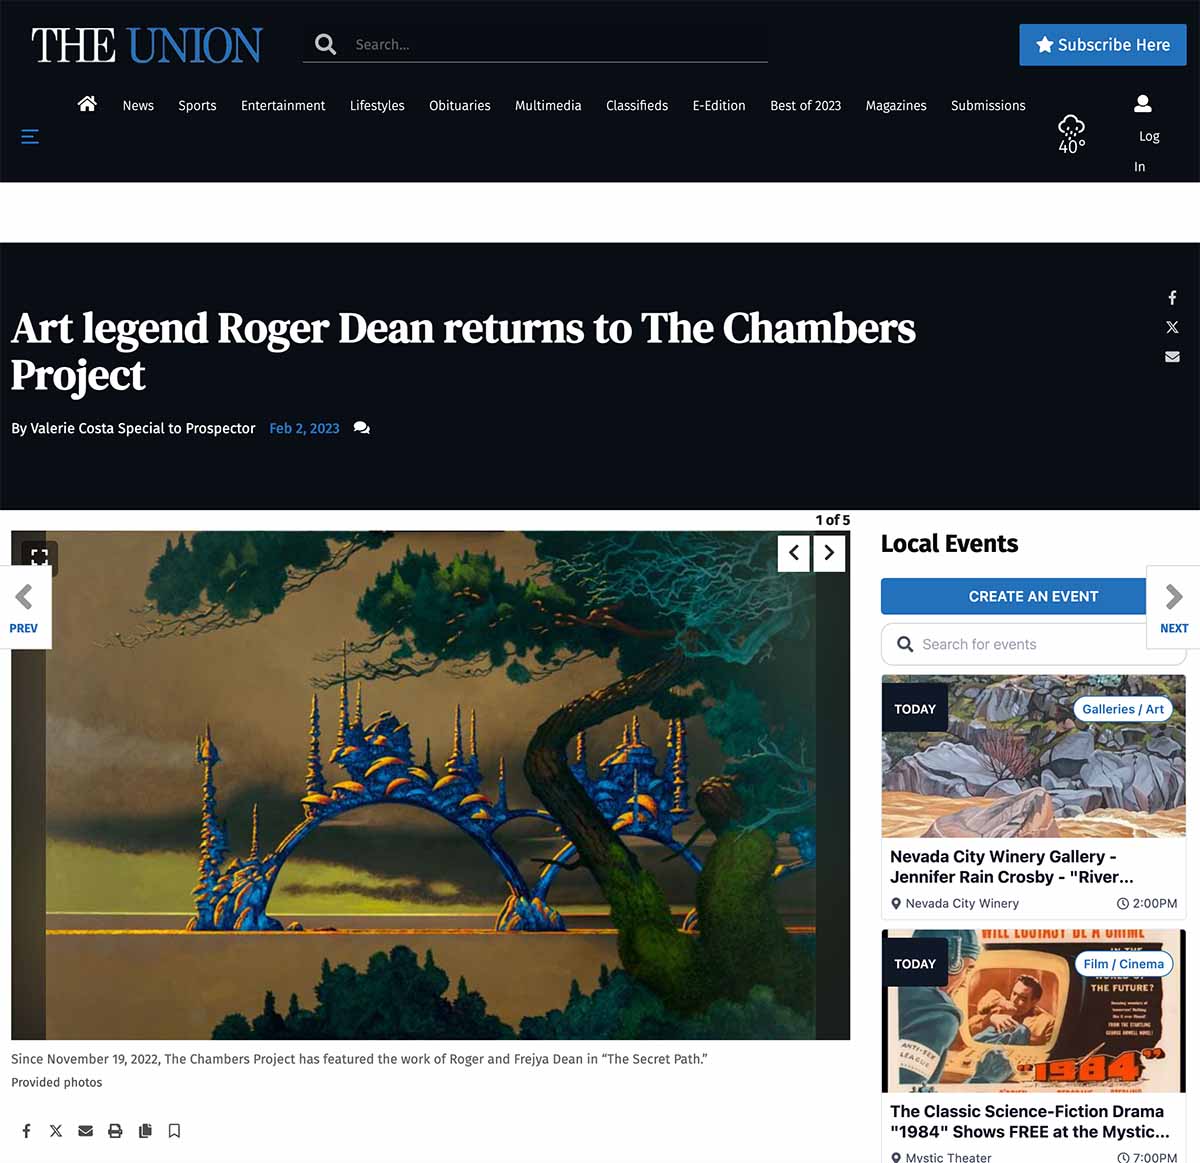 Art legend Roger Dean returns to The Chambers Project